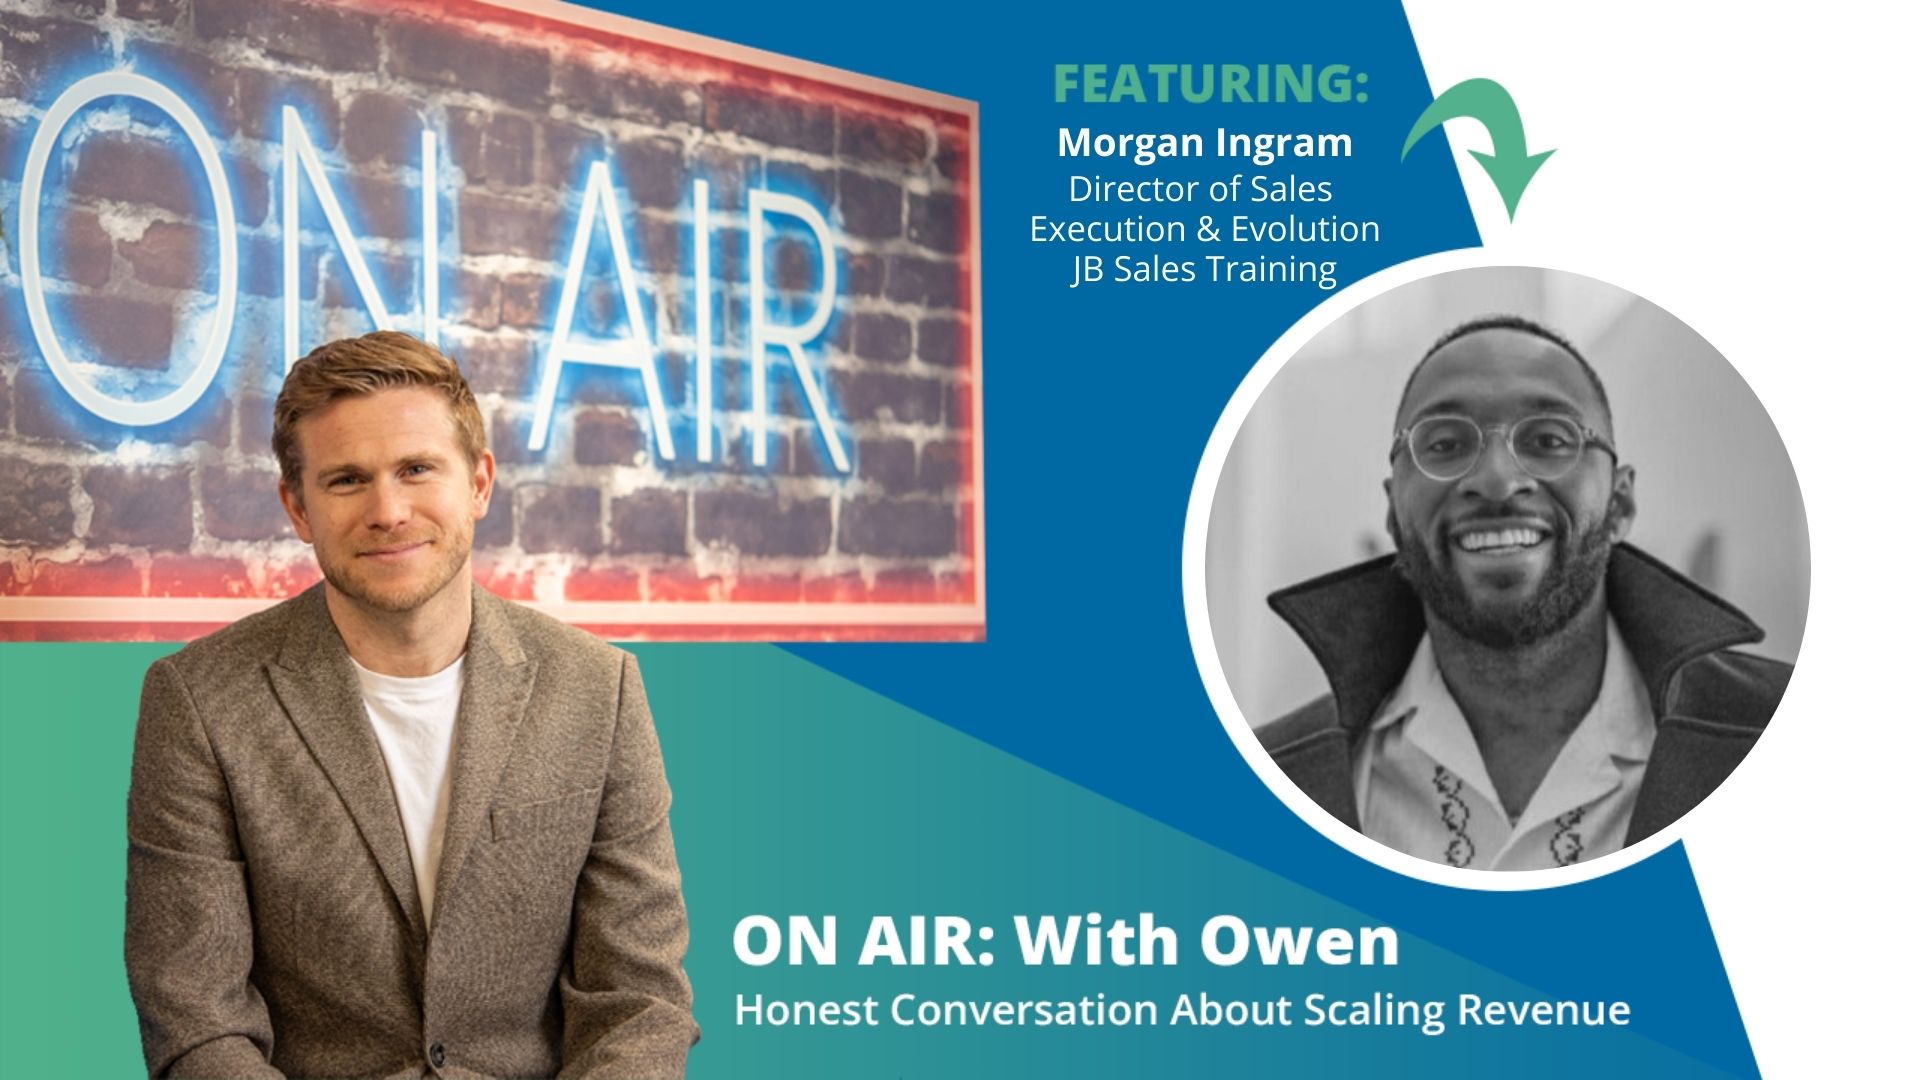 ON AIR: With Owen Episode 50 Featuring Morgan Ingram – Director of Sales Execution & Evolution at JB Sales